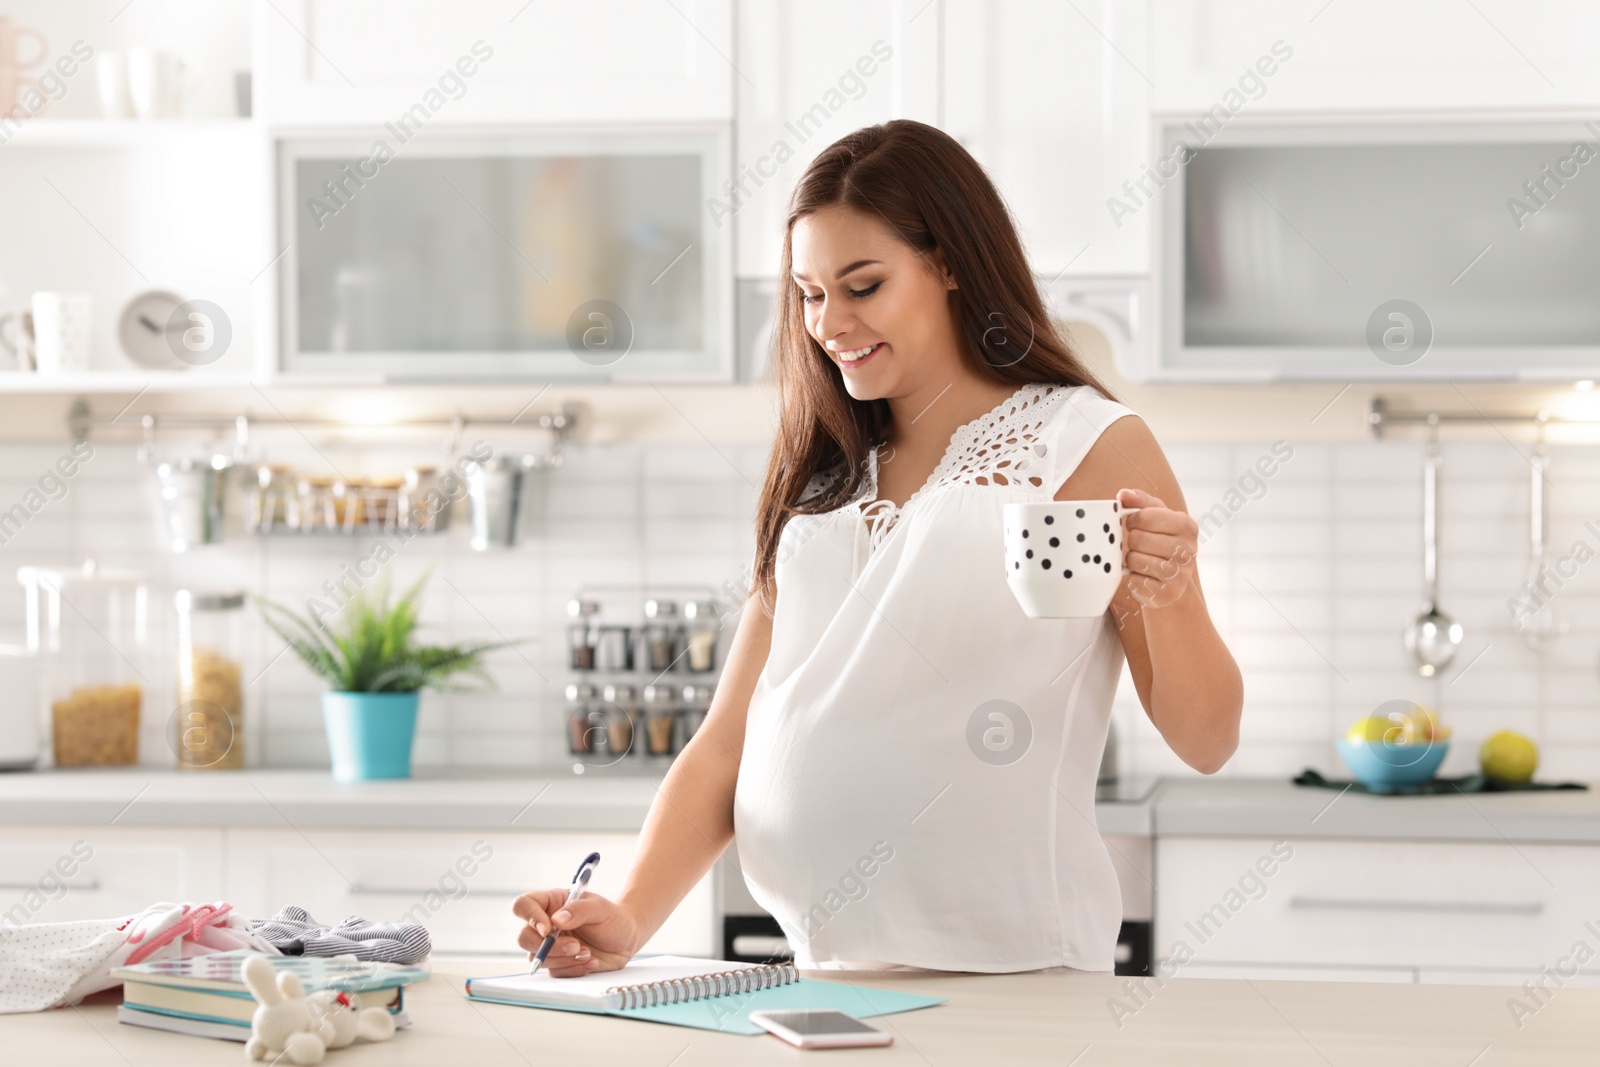 Photo of Pregnant woman writing packing list for maternity hospital in kitchen